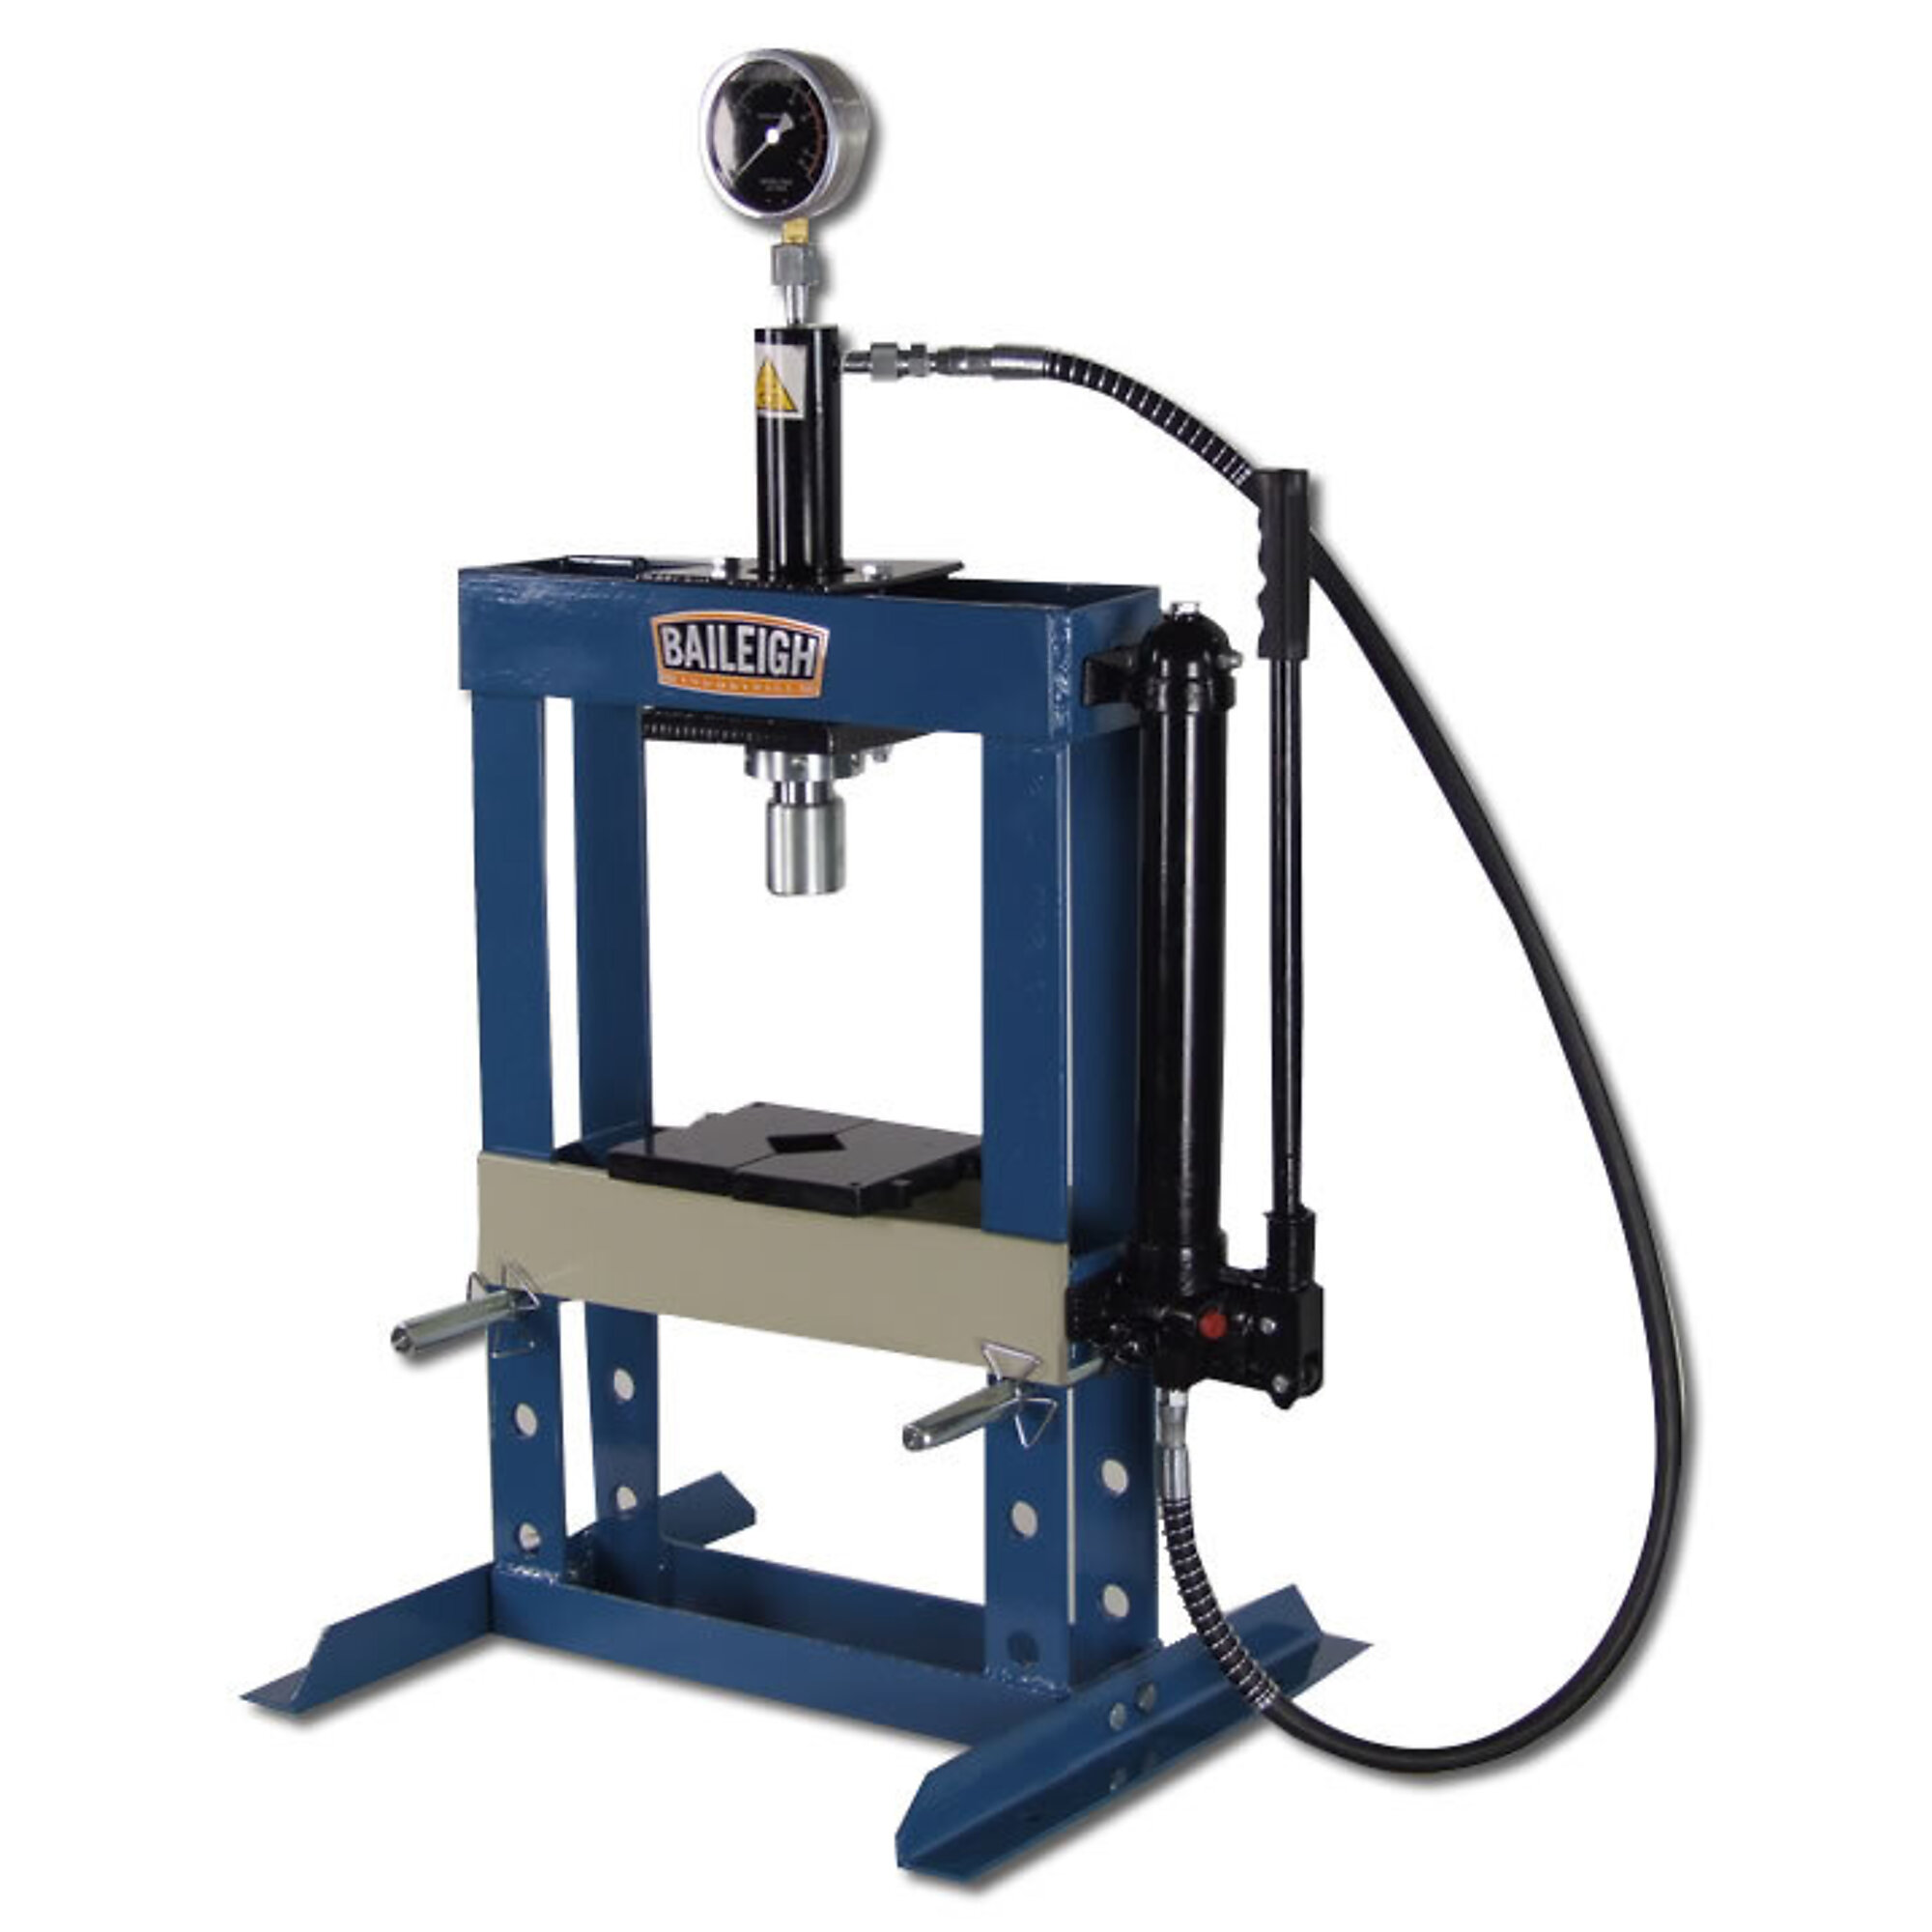 Baileigh, 10T Hand Operated H-Frame Press, Press Type Pneumatic, Max. Pressure 10 Tons, Model HSP-10H